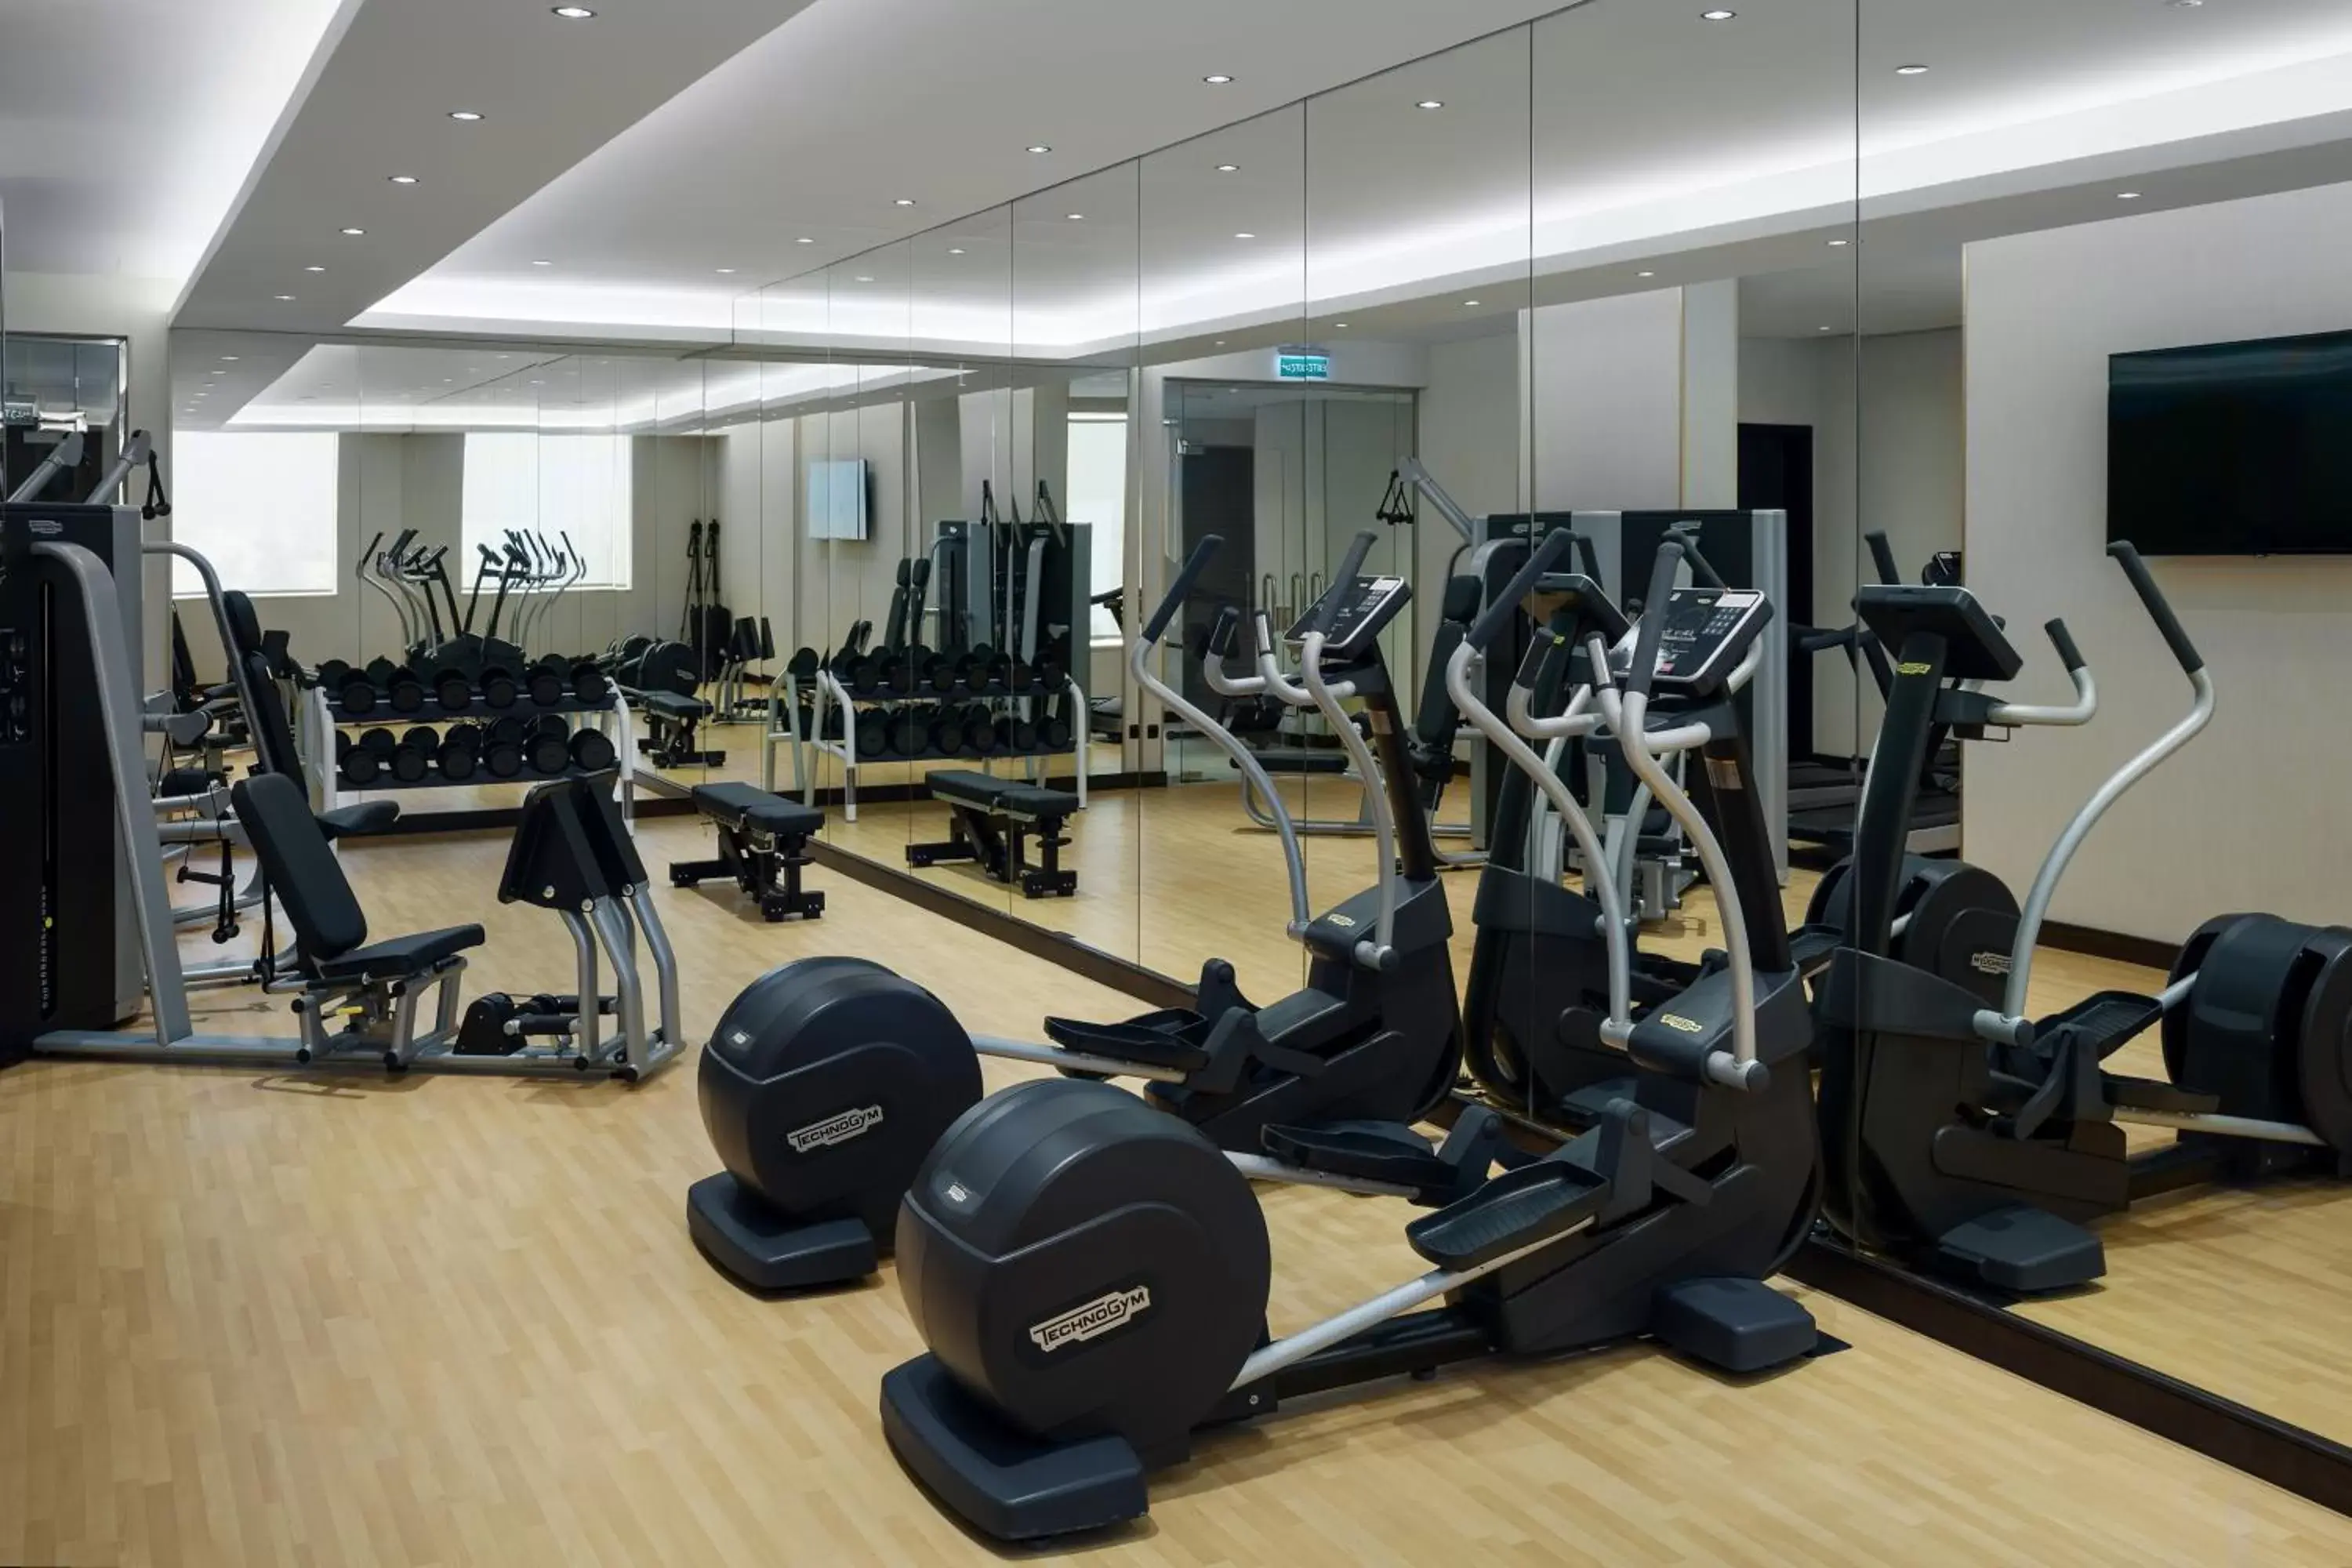 Fitness centre/facilities, Fitness Center/Facilities in Hyatt Place Riyadh Sulaimania